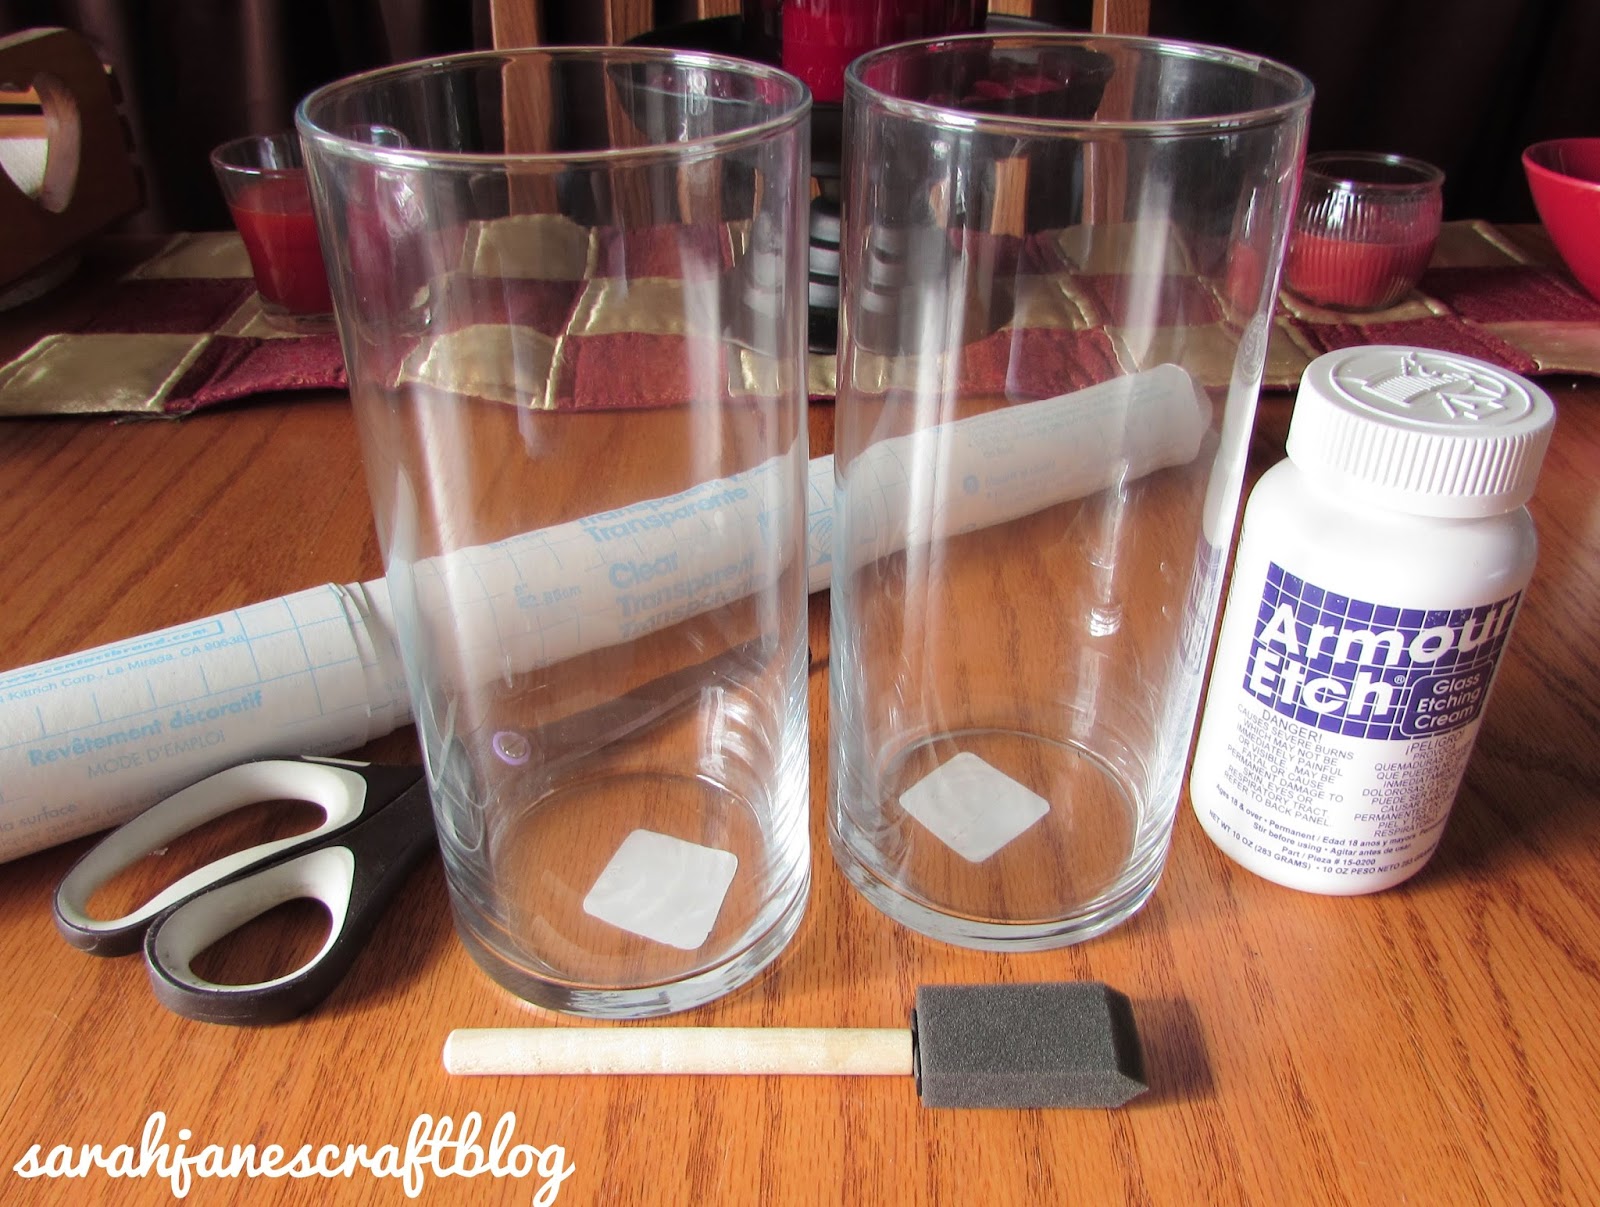 How to Make an Etched Glass Water Bottle